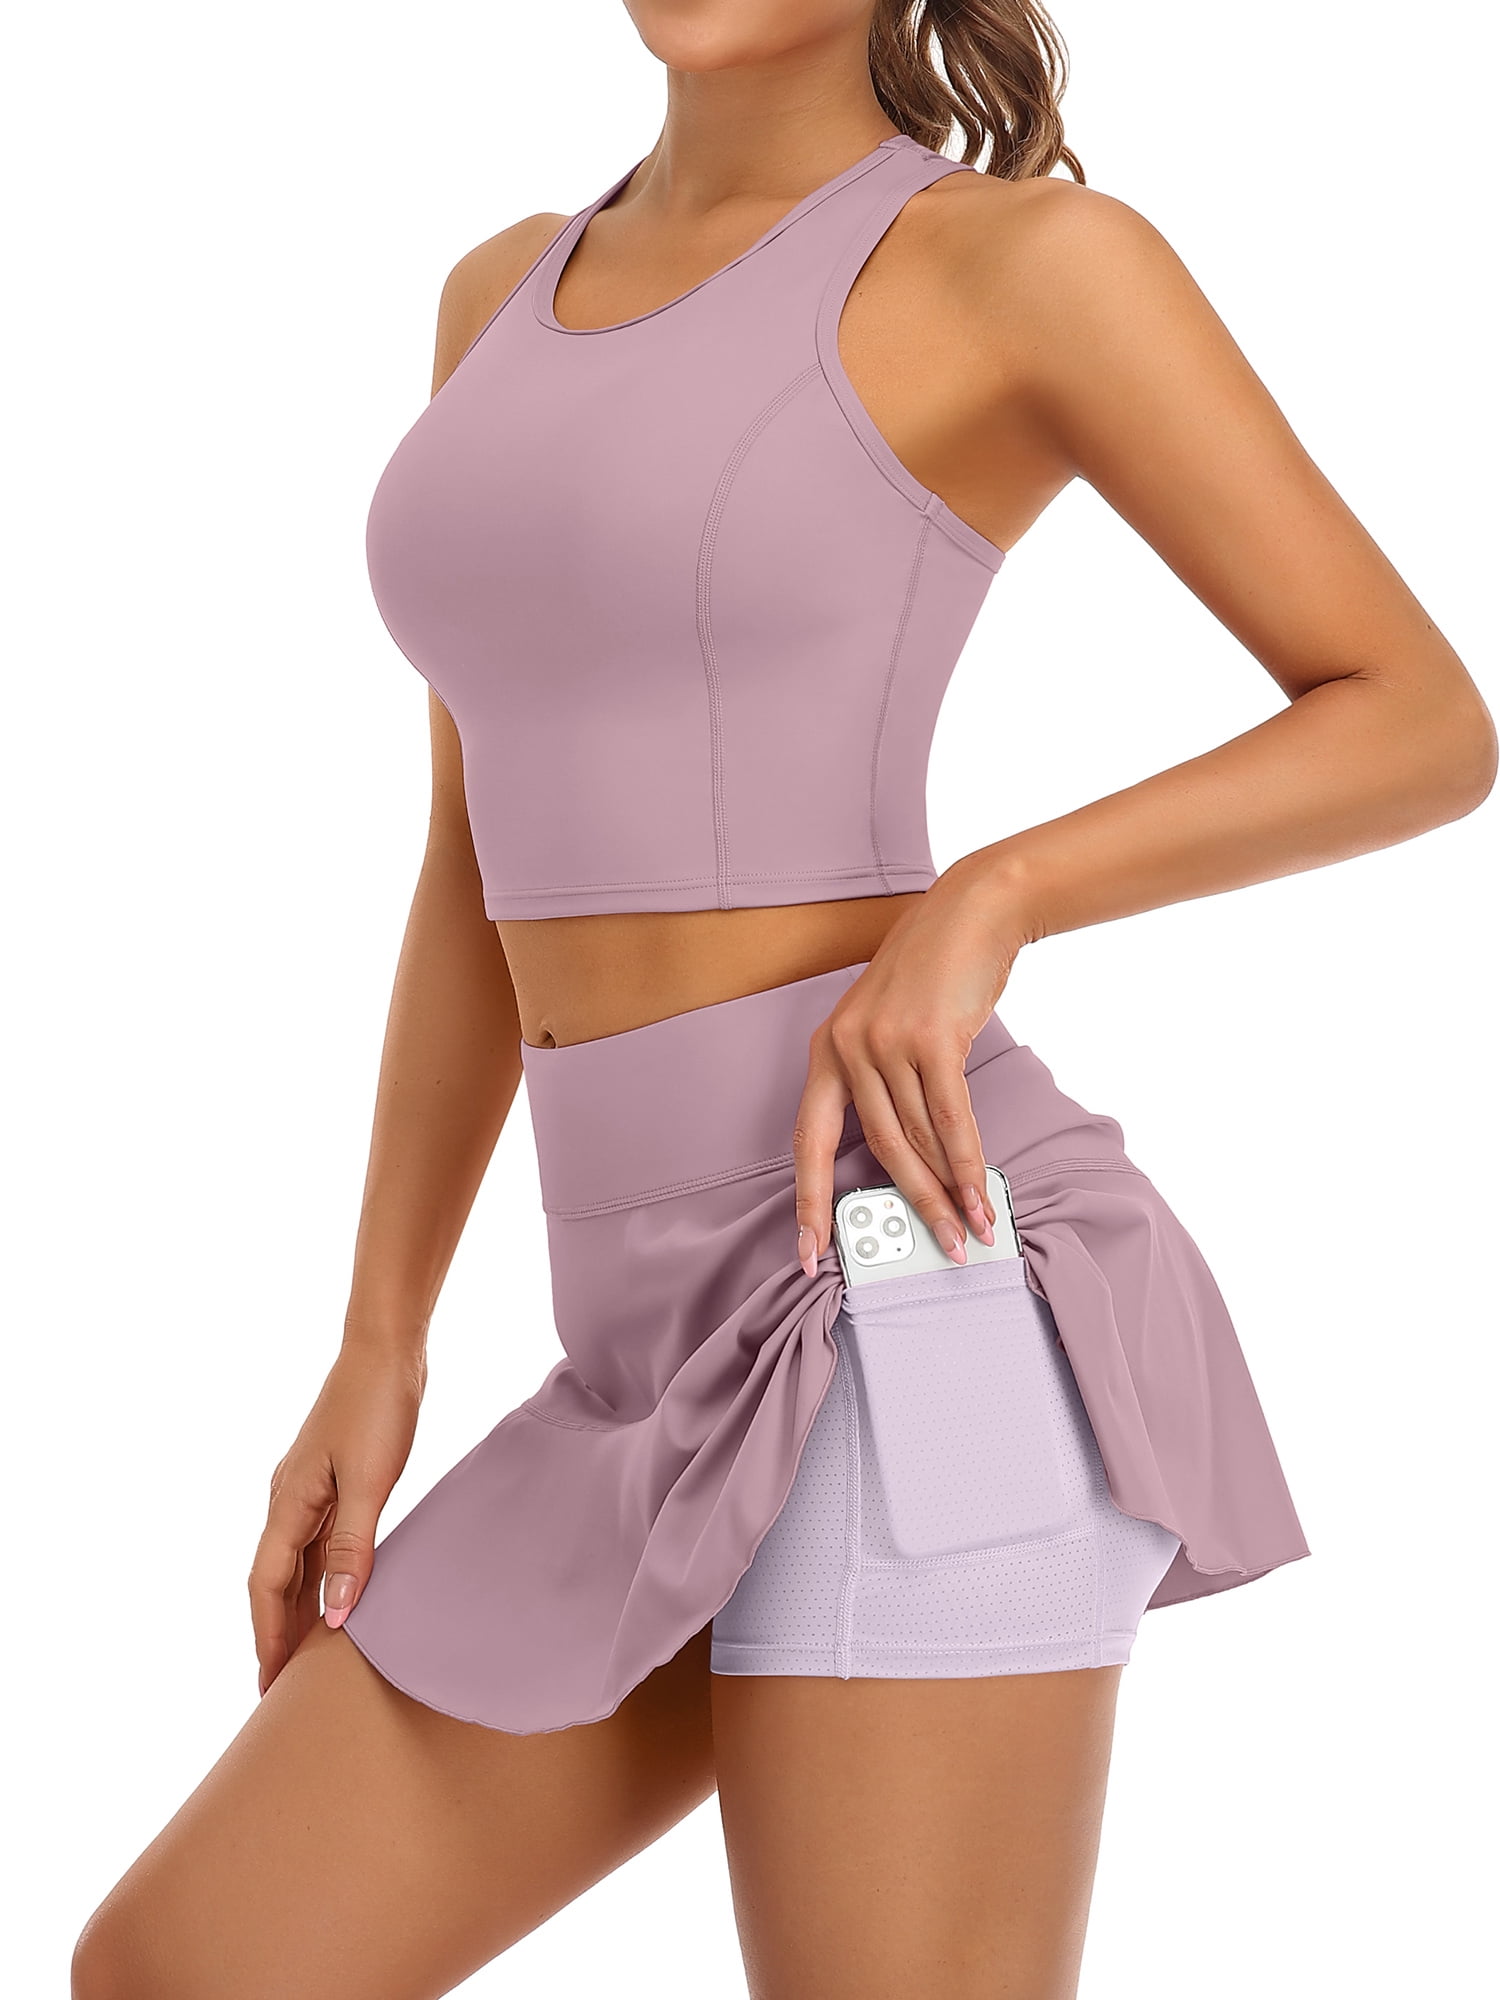 Womens 2 Piece Tennis Skirts Sets with Built-in Shorts and Pockets Workout Outfits Dresses